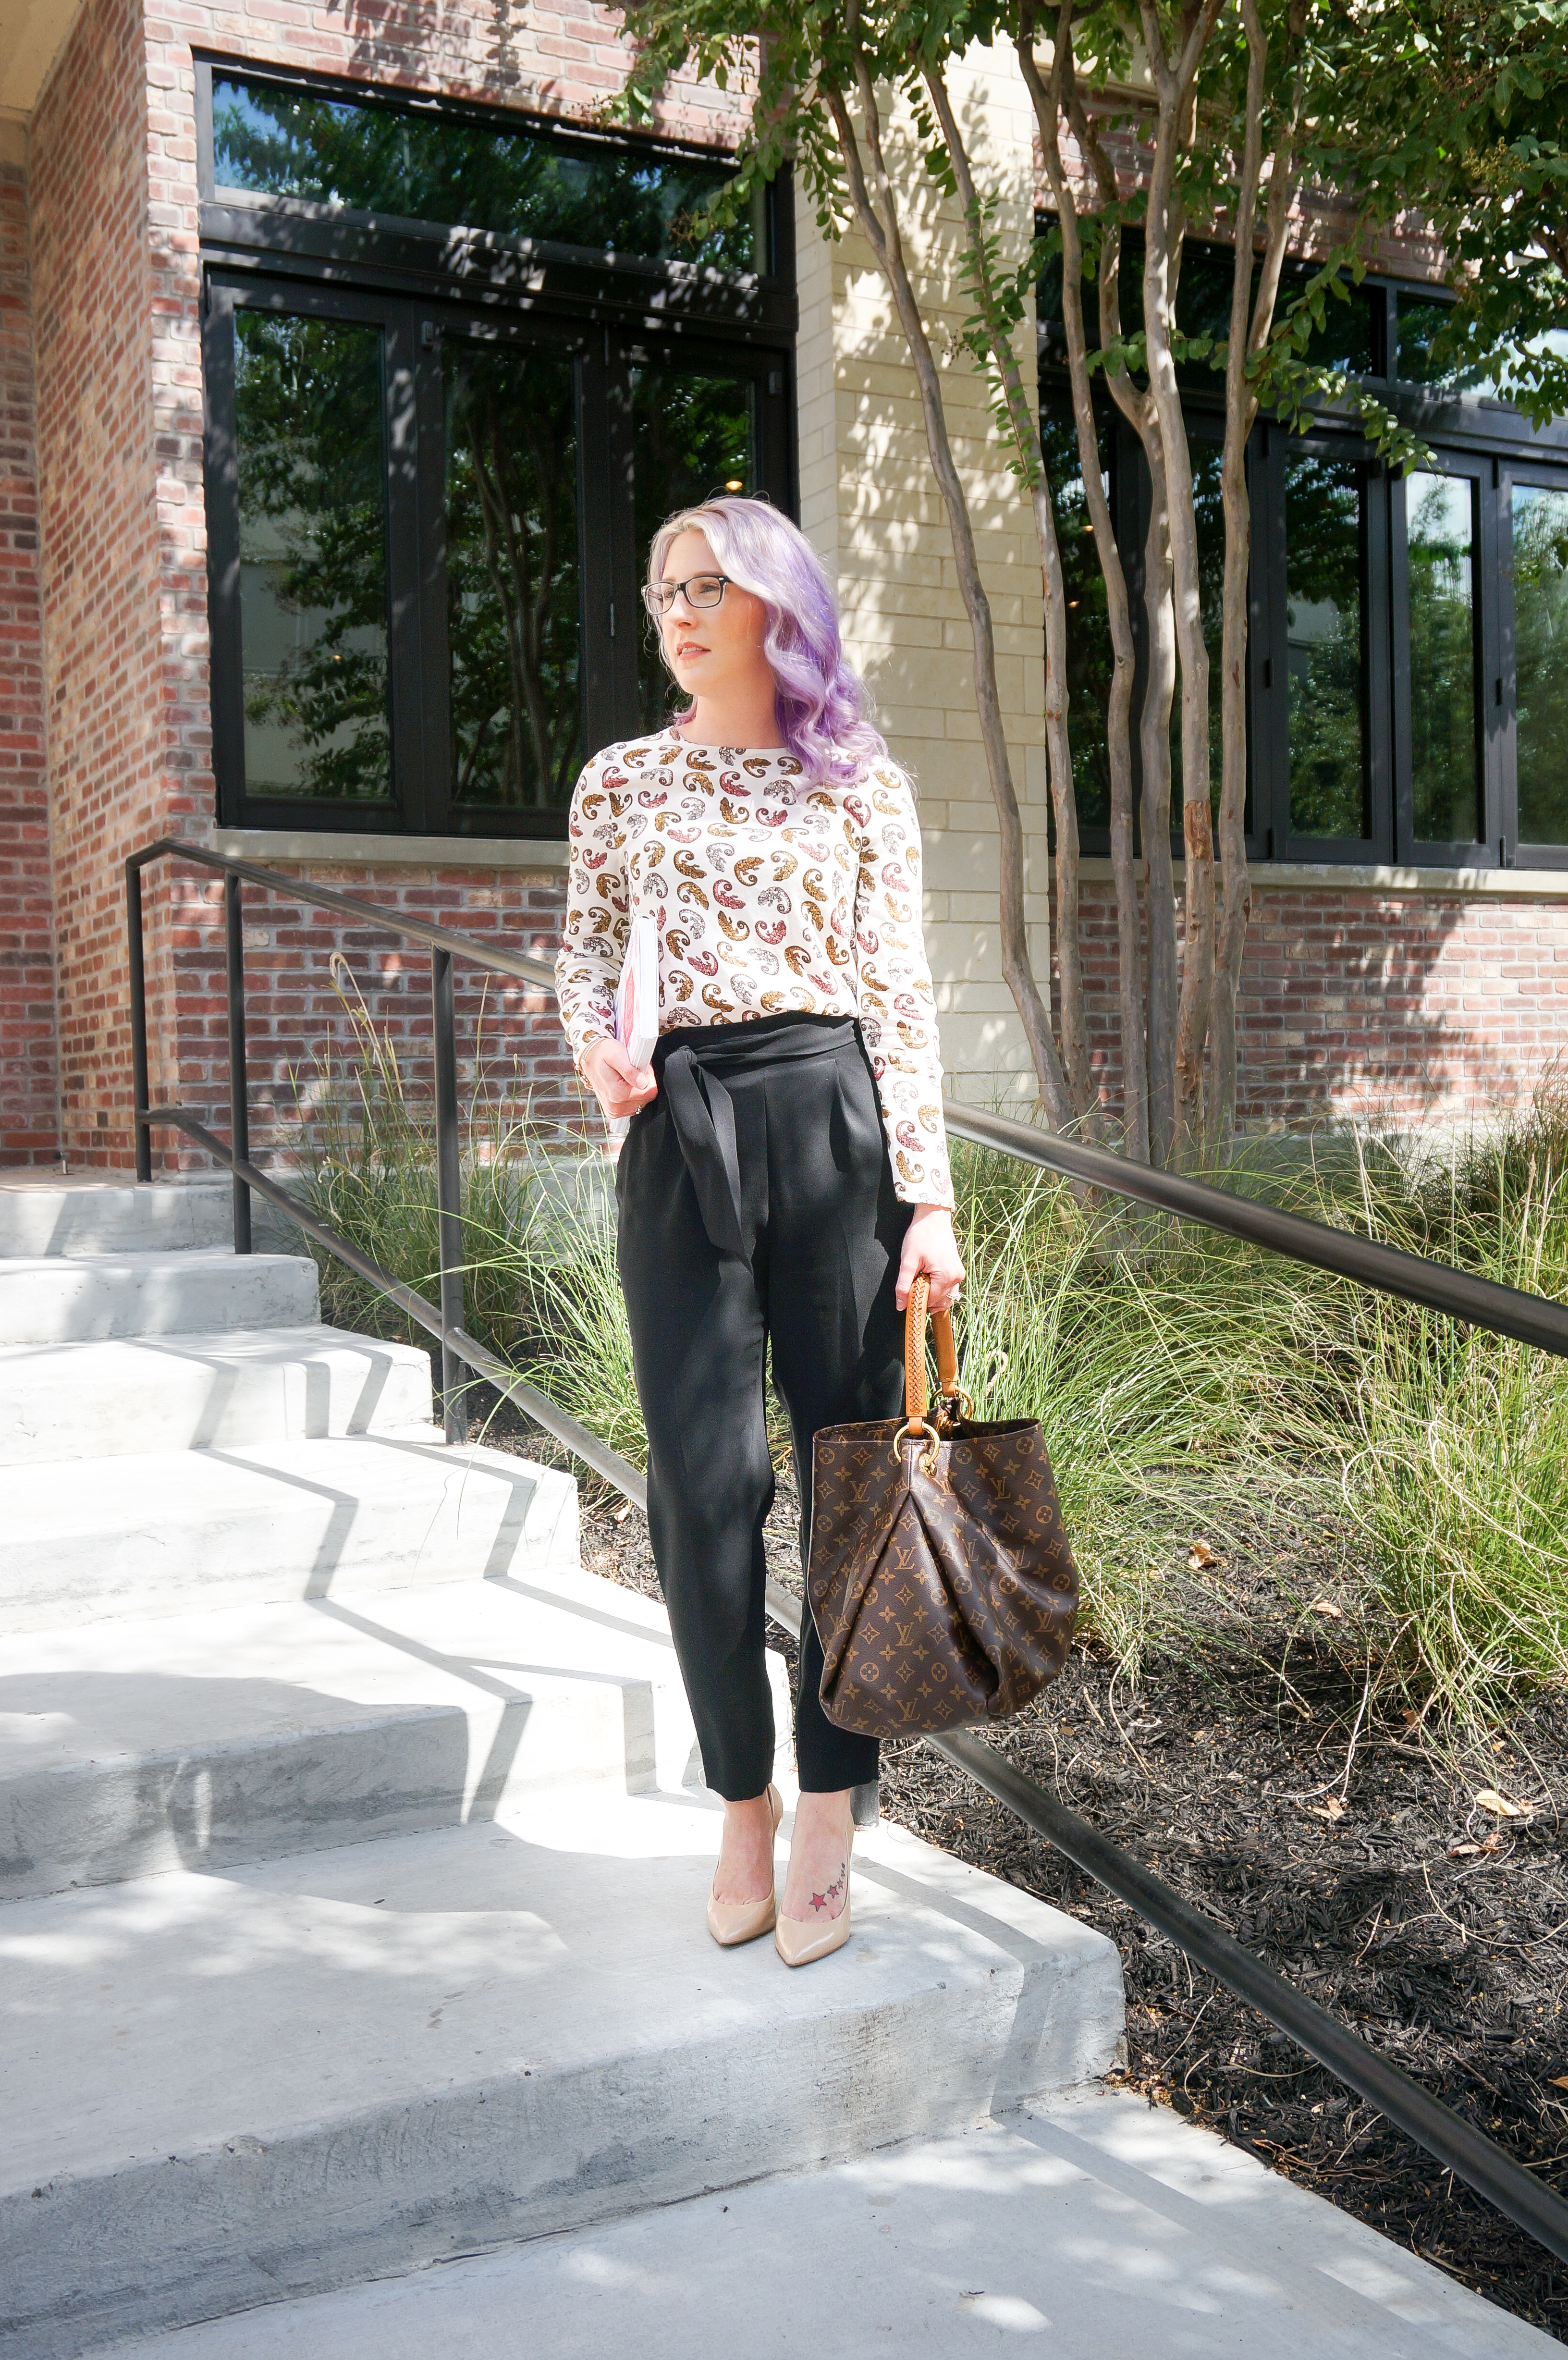 houston blogger, fashion blogger, style blogger, work wear, business casual, HM - The New Blogger Struggle is Real by Houston fashion blogger Gracefully Sassy